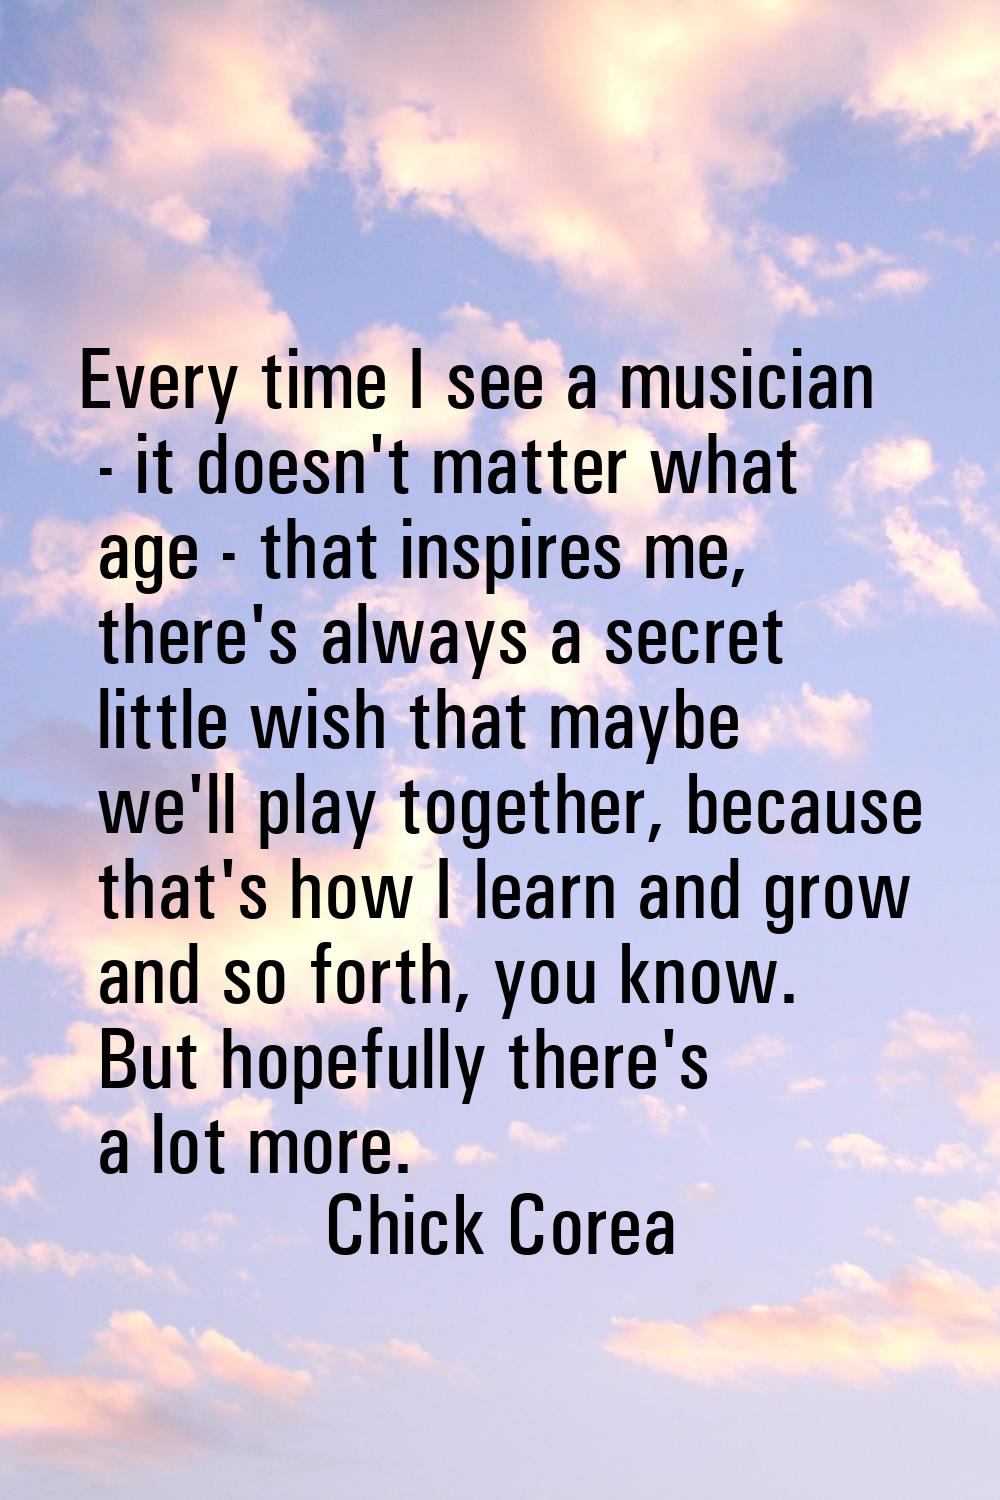 Every time I see a musician - it doesn't matter what age - that inspires me, there's always a secre